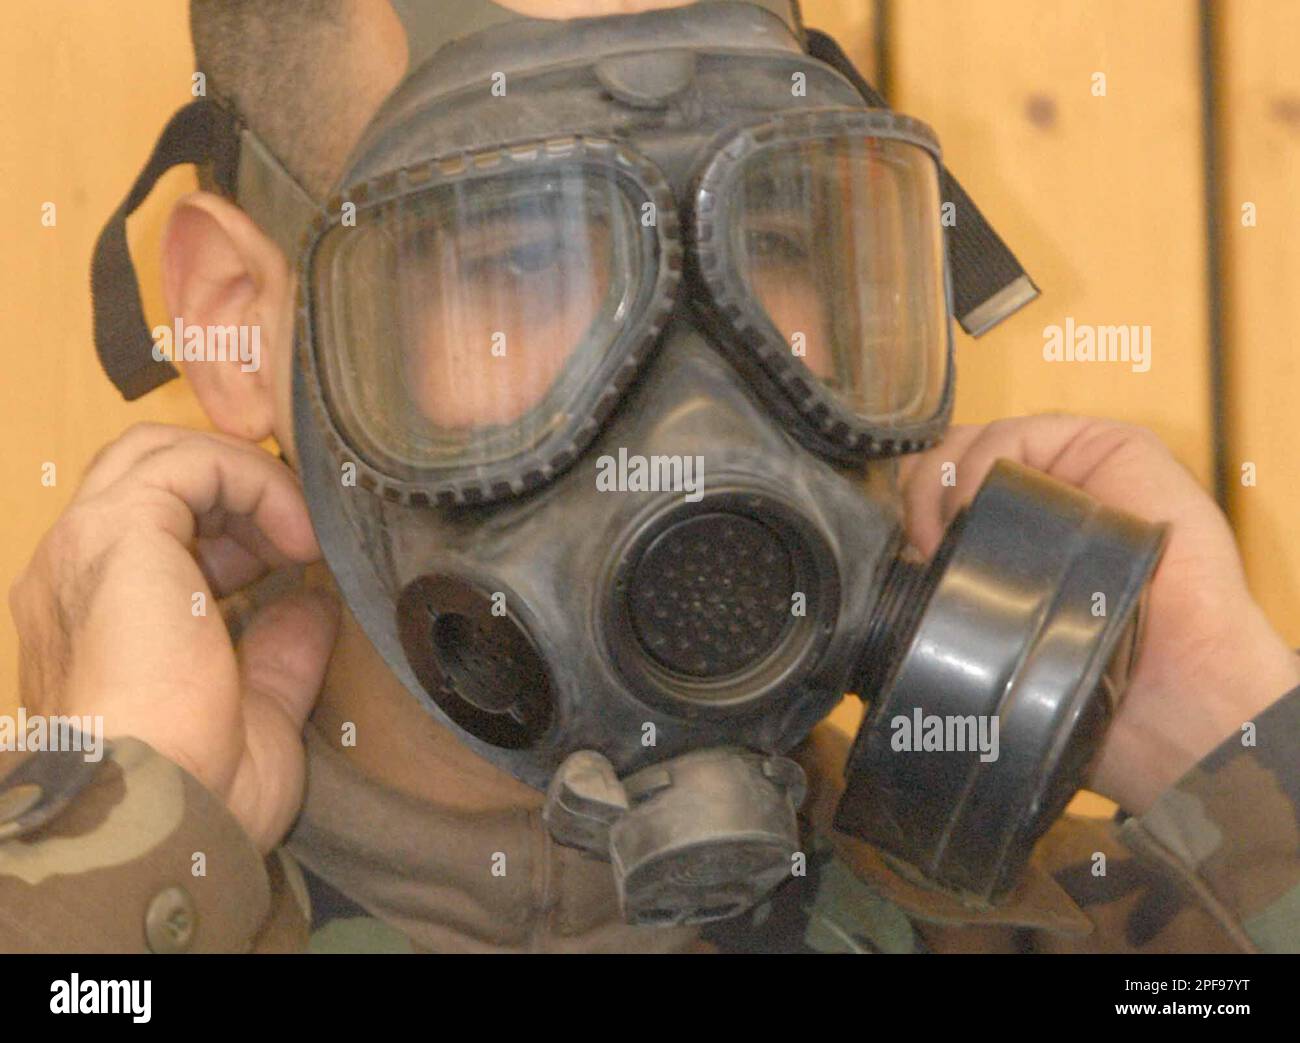 Sgt. Kirtan Stoute, from New York, NY a gasmask at the Barracks in Wuerzburg, Germany, on Friday, Jan. 31, 2003. The U.S. soldiers are equipment in preparation deployment